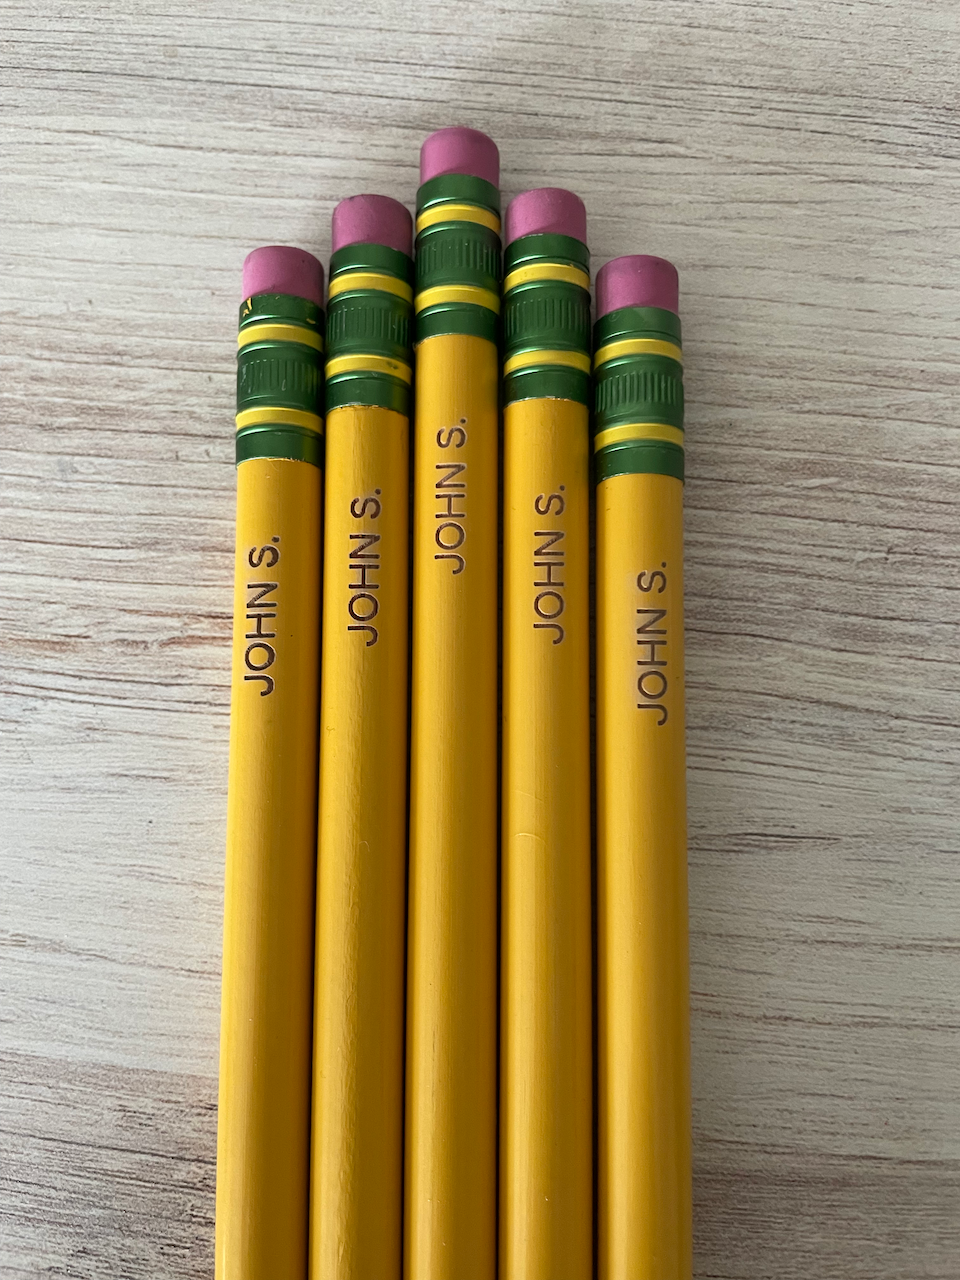 Engraved My First Ticonderoga Pencils - 5 pack